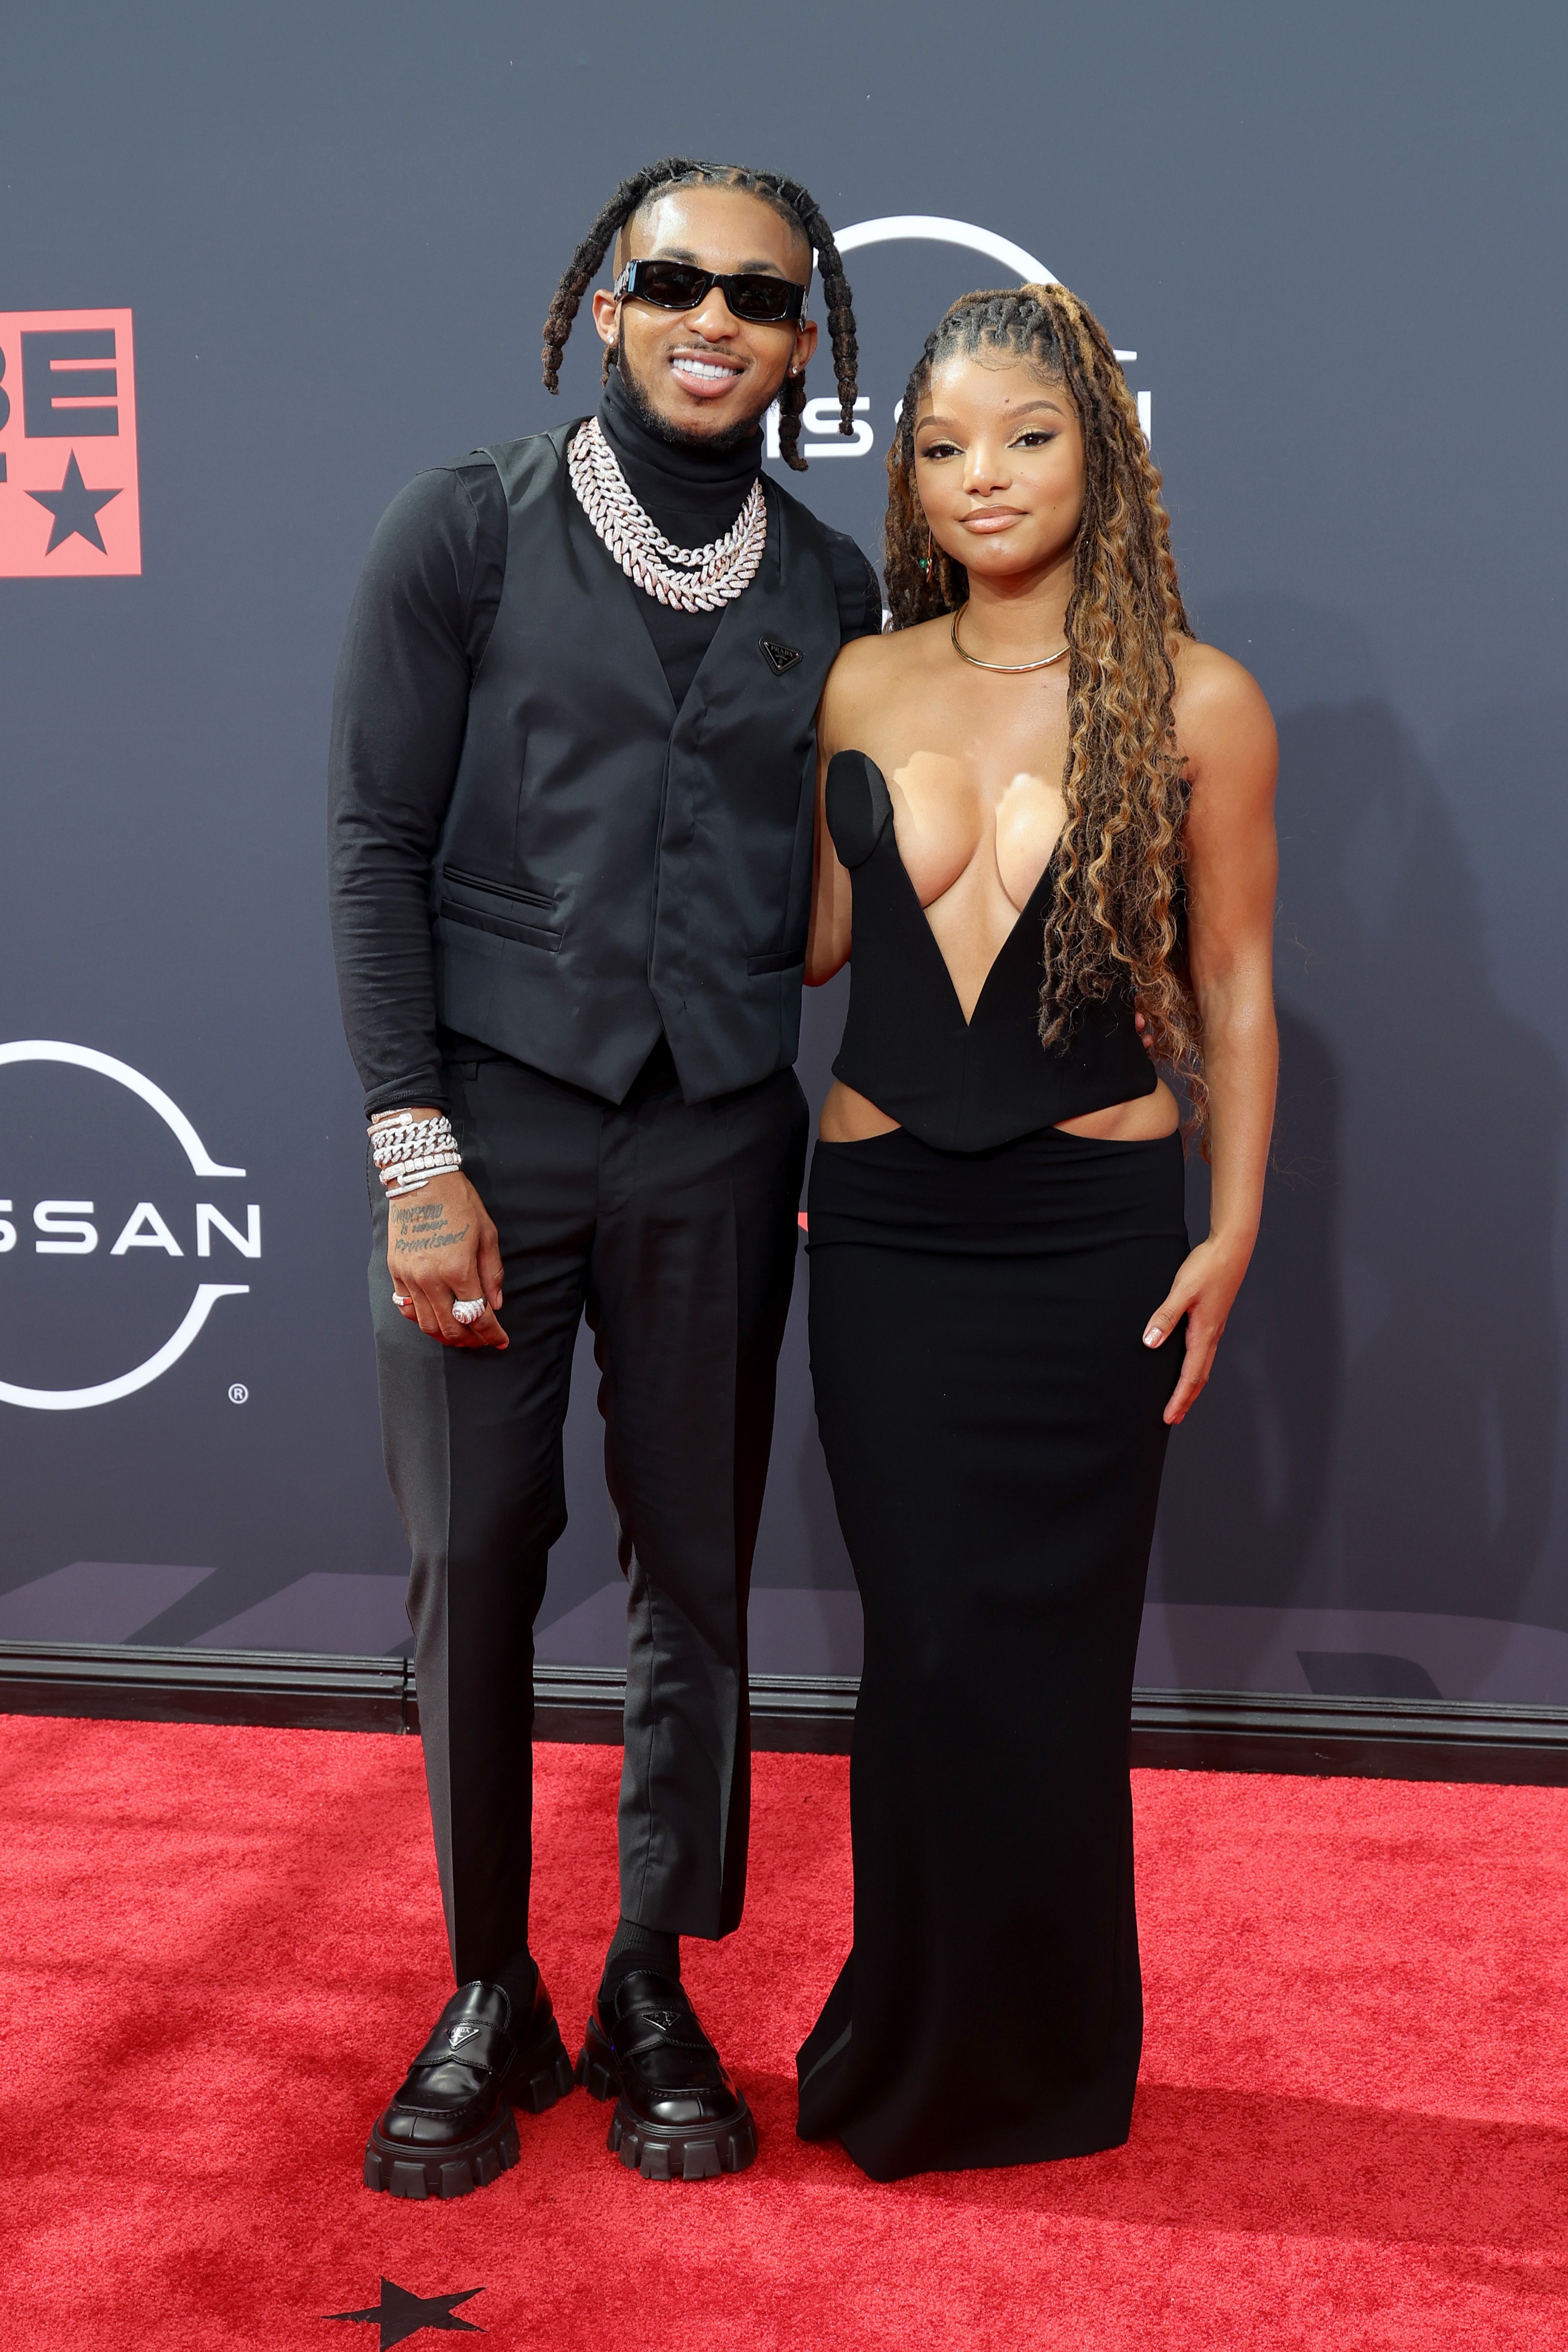 Halle Bailey and DDG Make a Stylish Red Carpet Debut at the BET Awards / Twitter